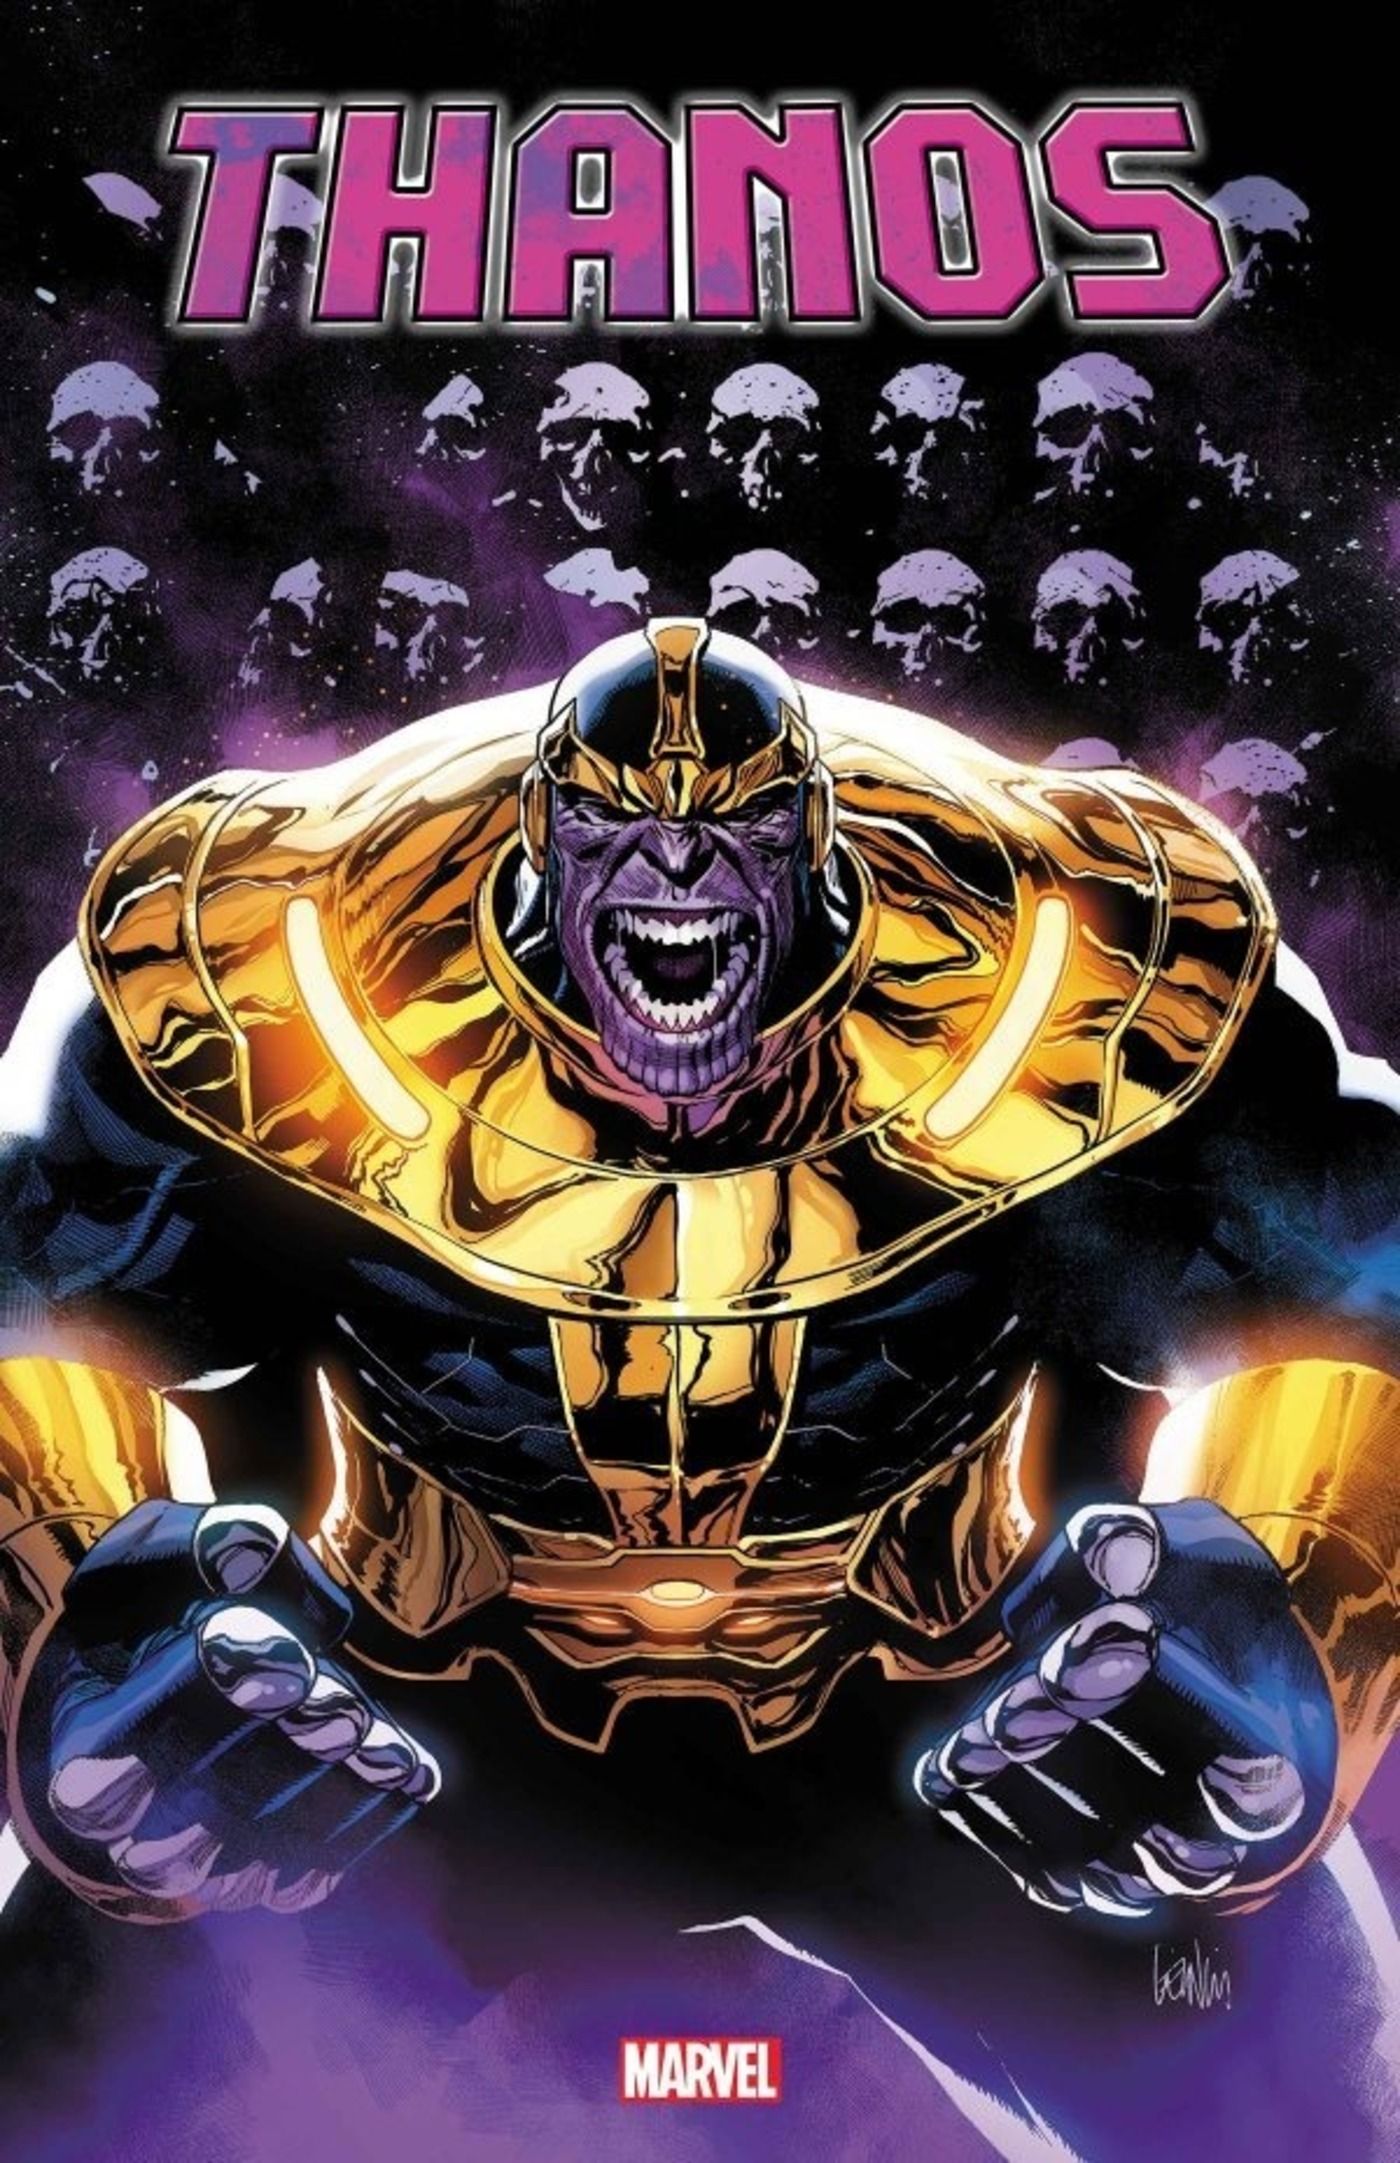 Thanos Writer Calls Out His “Perfect White-Capped Teeth” – But There’s a Reason They Make Sense